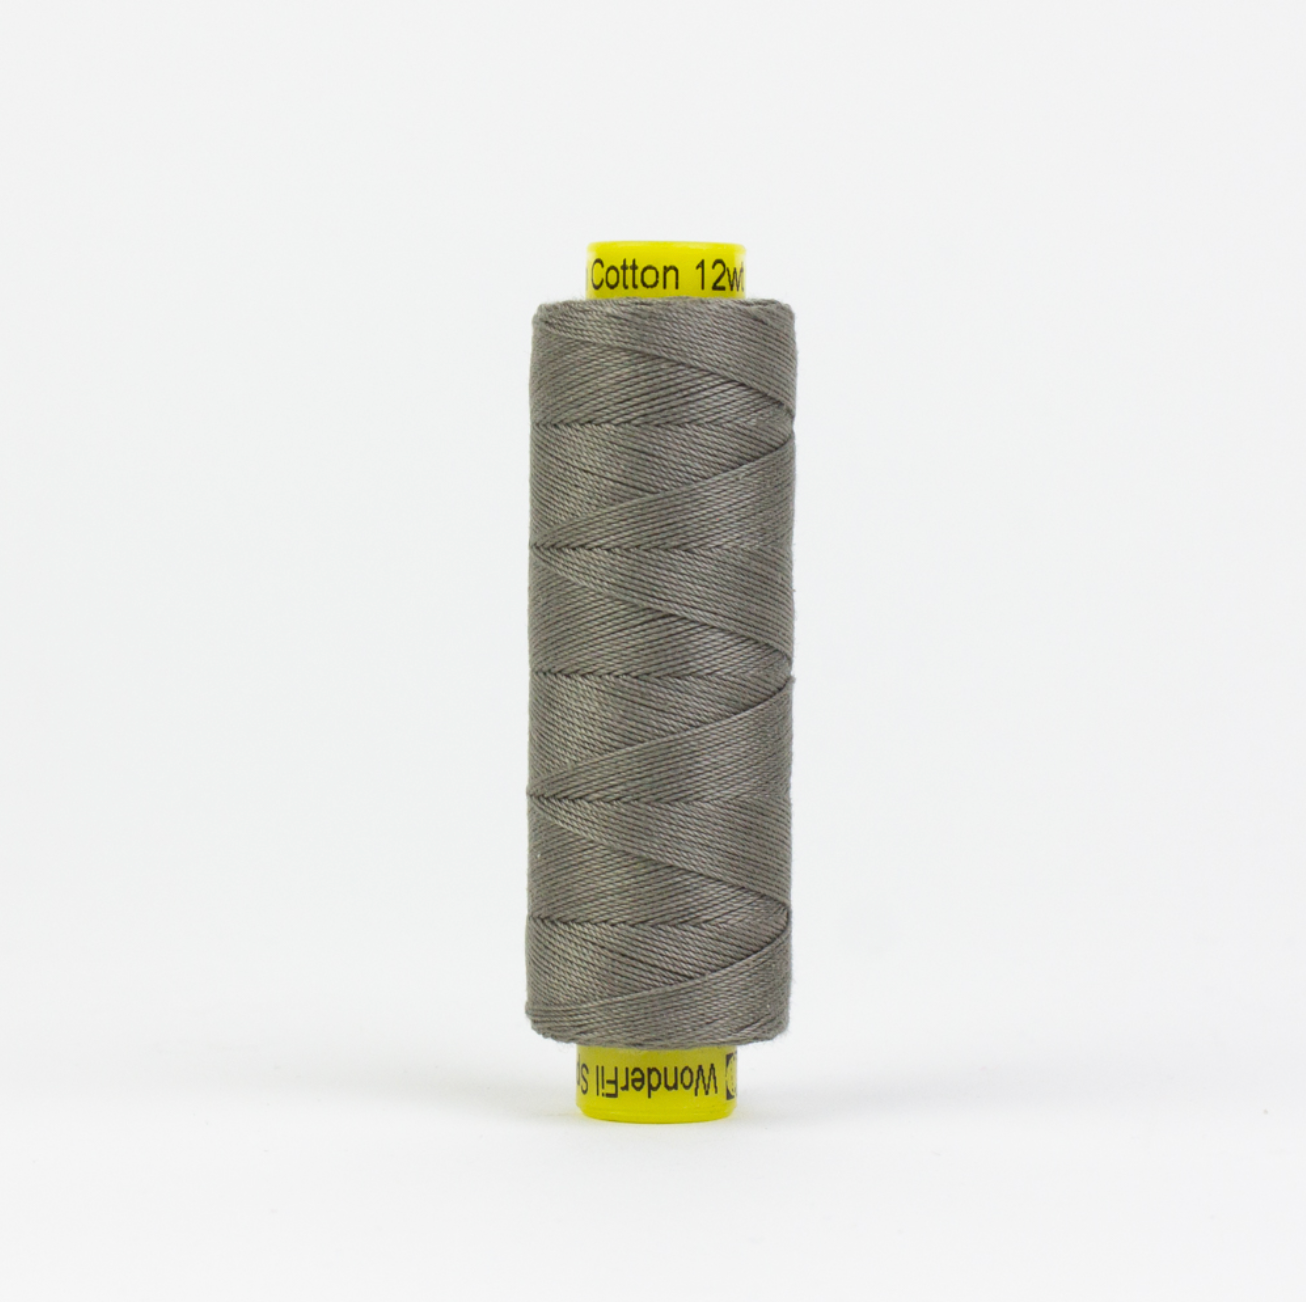 Spagetti 12wt Egyptian Cotton Thread - 109yd Spool - Med. Grey Taupe SP-19